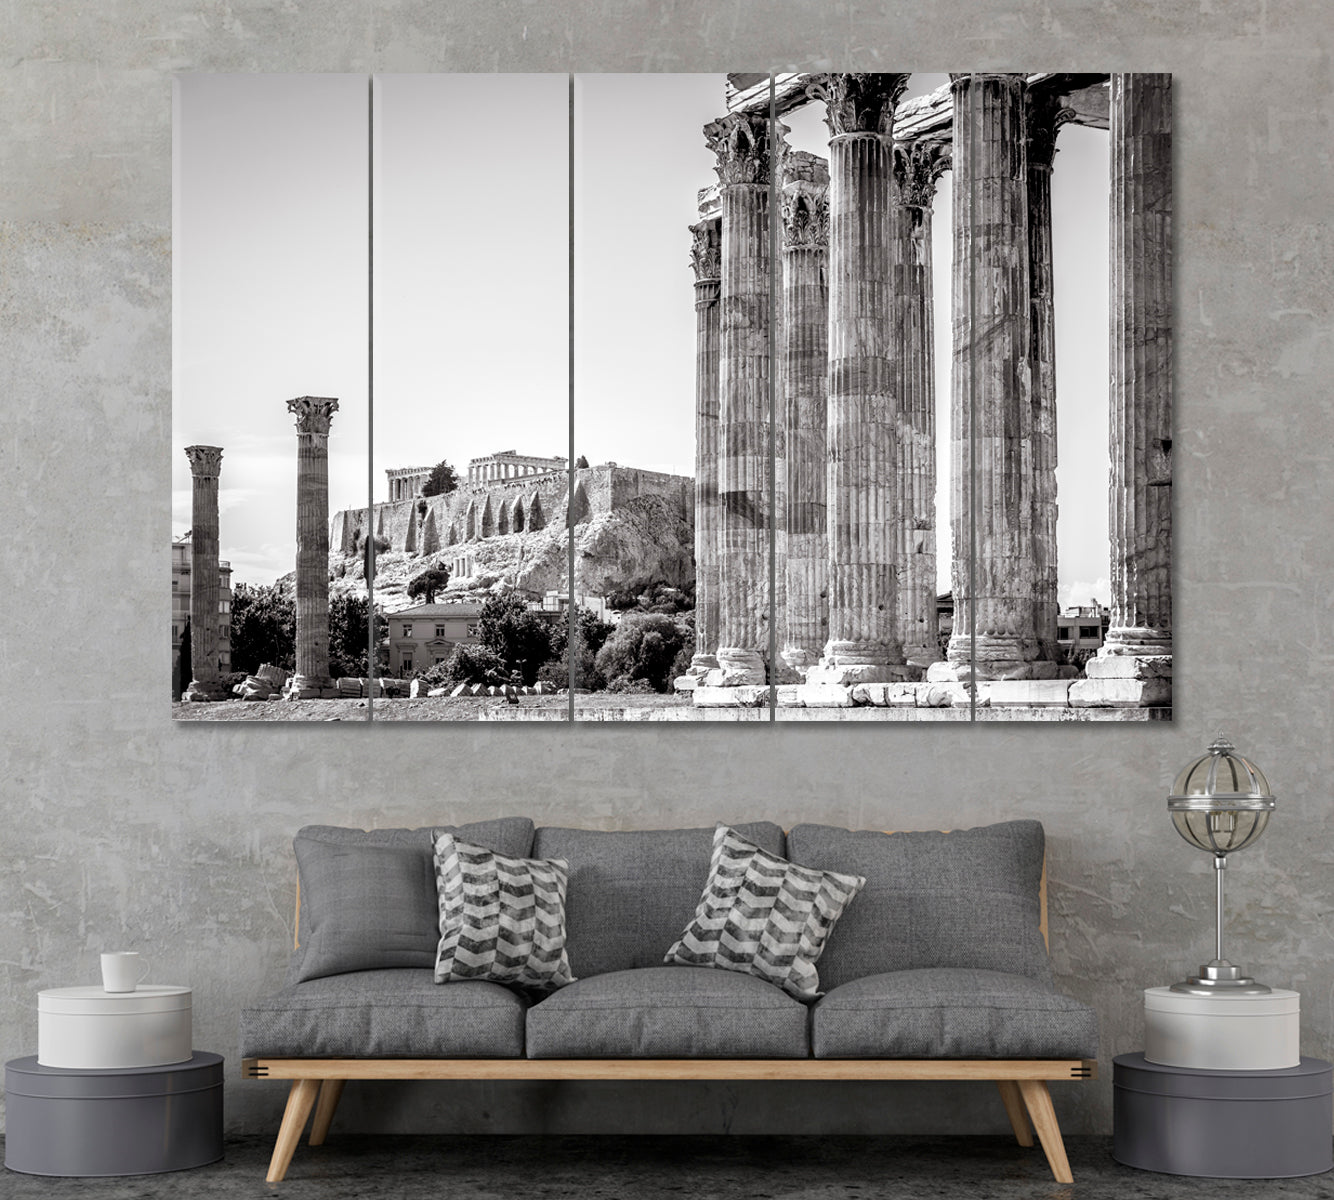 Temple of Zeus Olympia Greece Canvas Print ArtLexy 5 Panels 36"x24" inches 